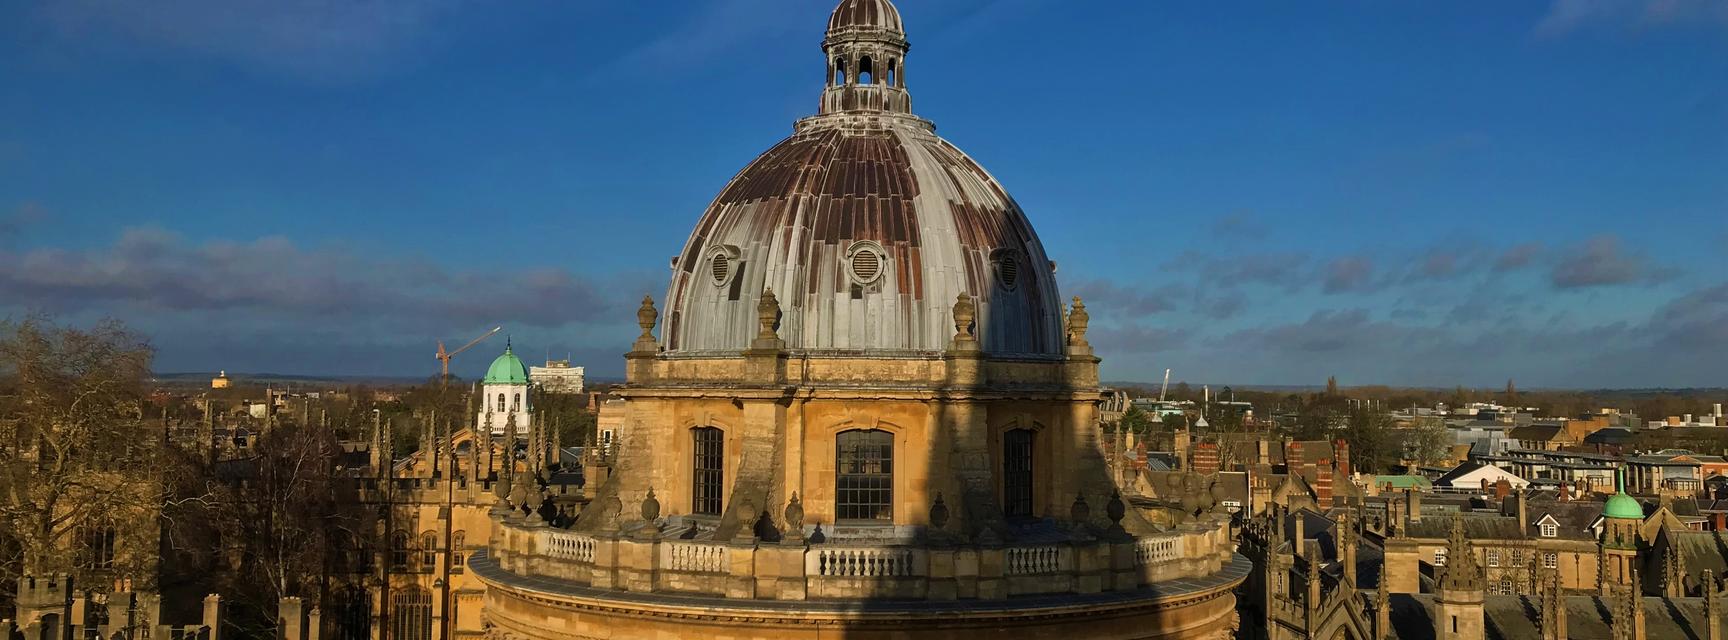 Photo of the Radcliffe Camera